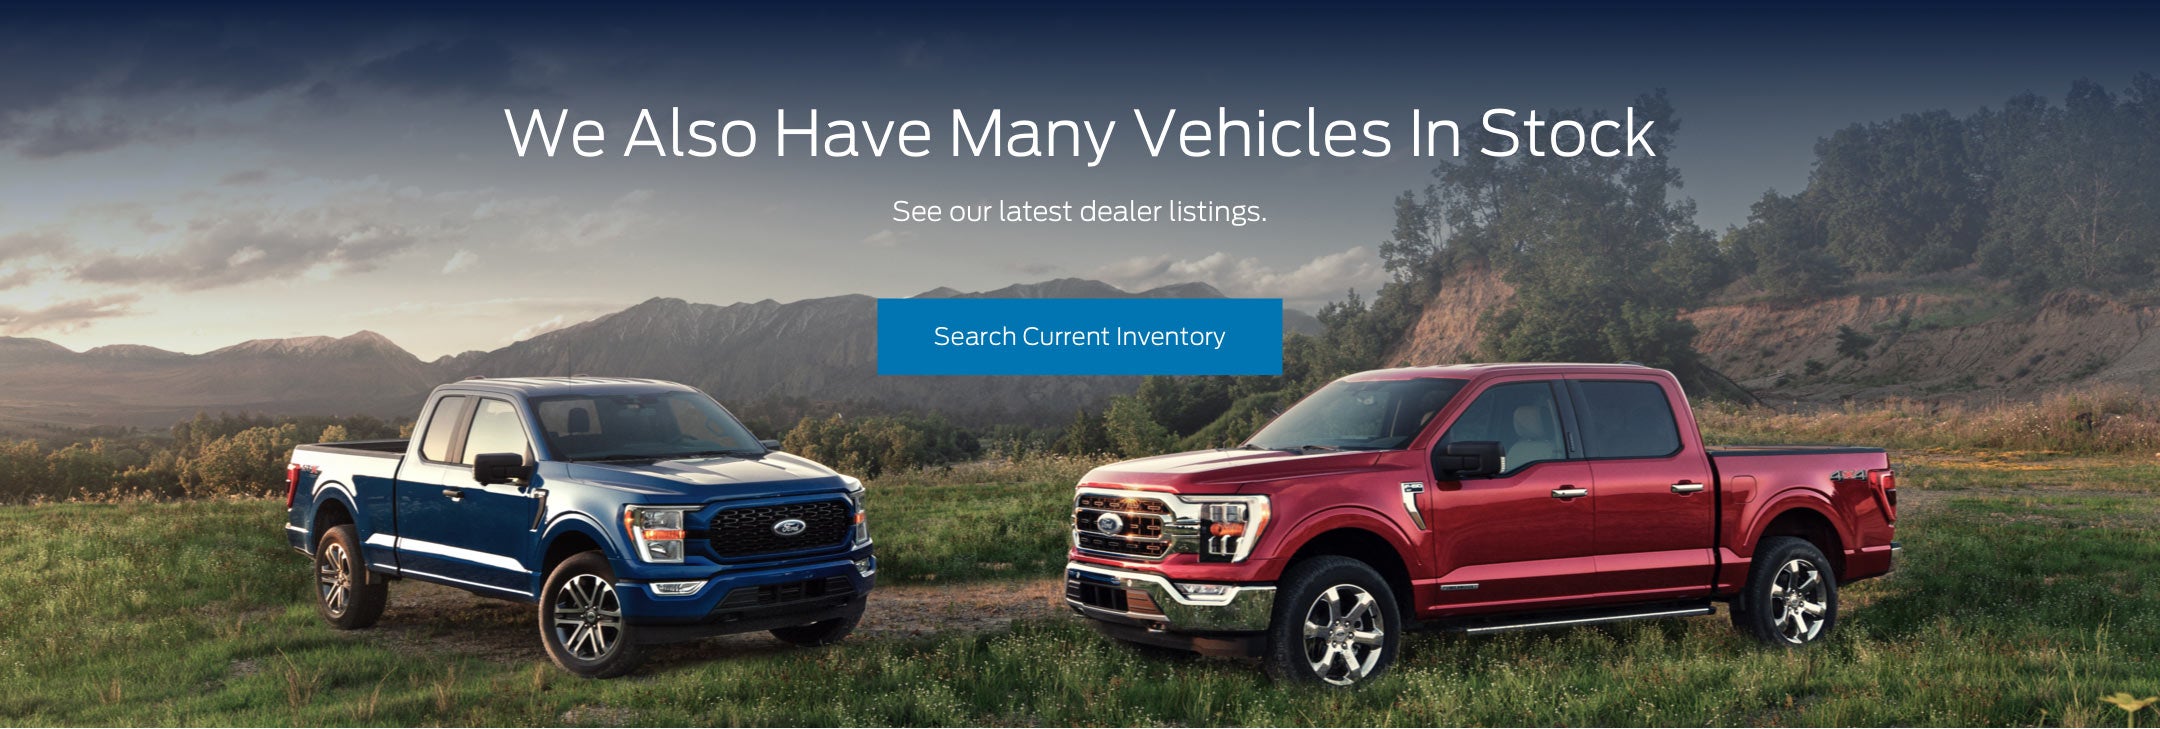 Ford vehicles in stock | Queen City Ford in Cincinnati OH